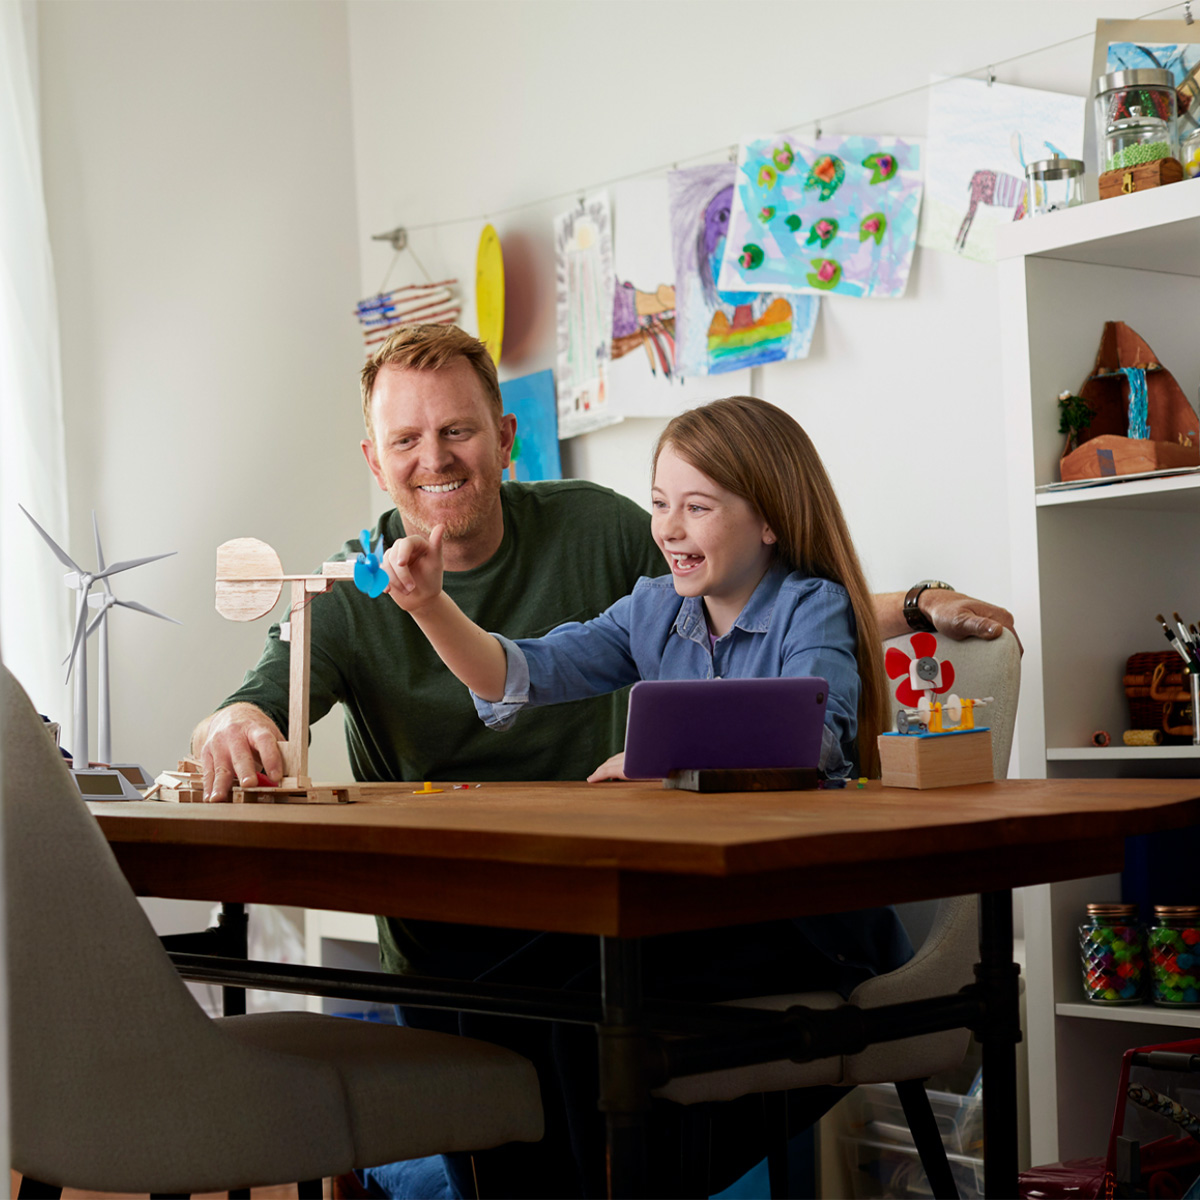 A Father and daughter sit at a table together and work on a science project